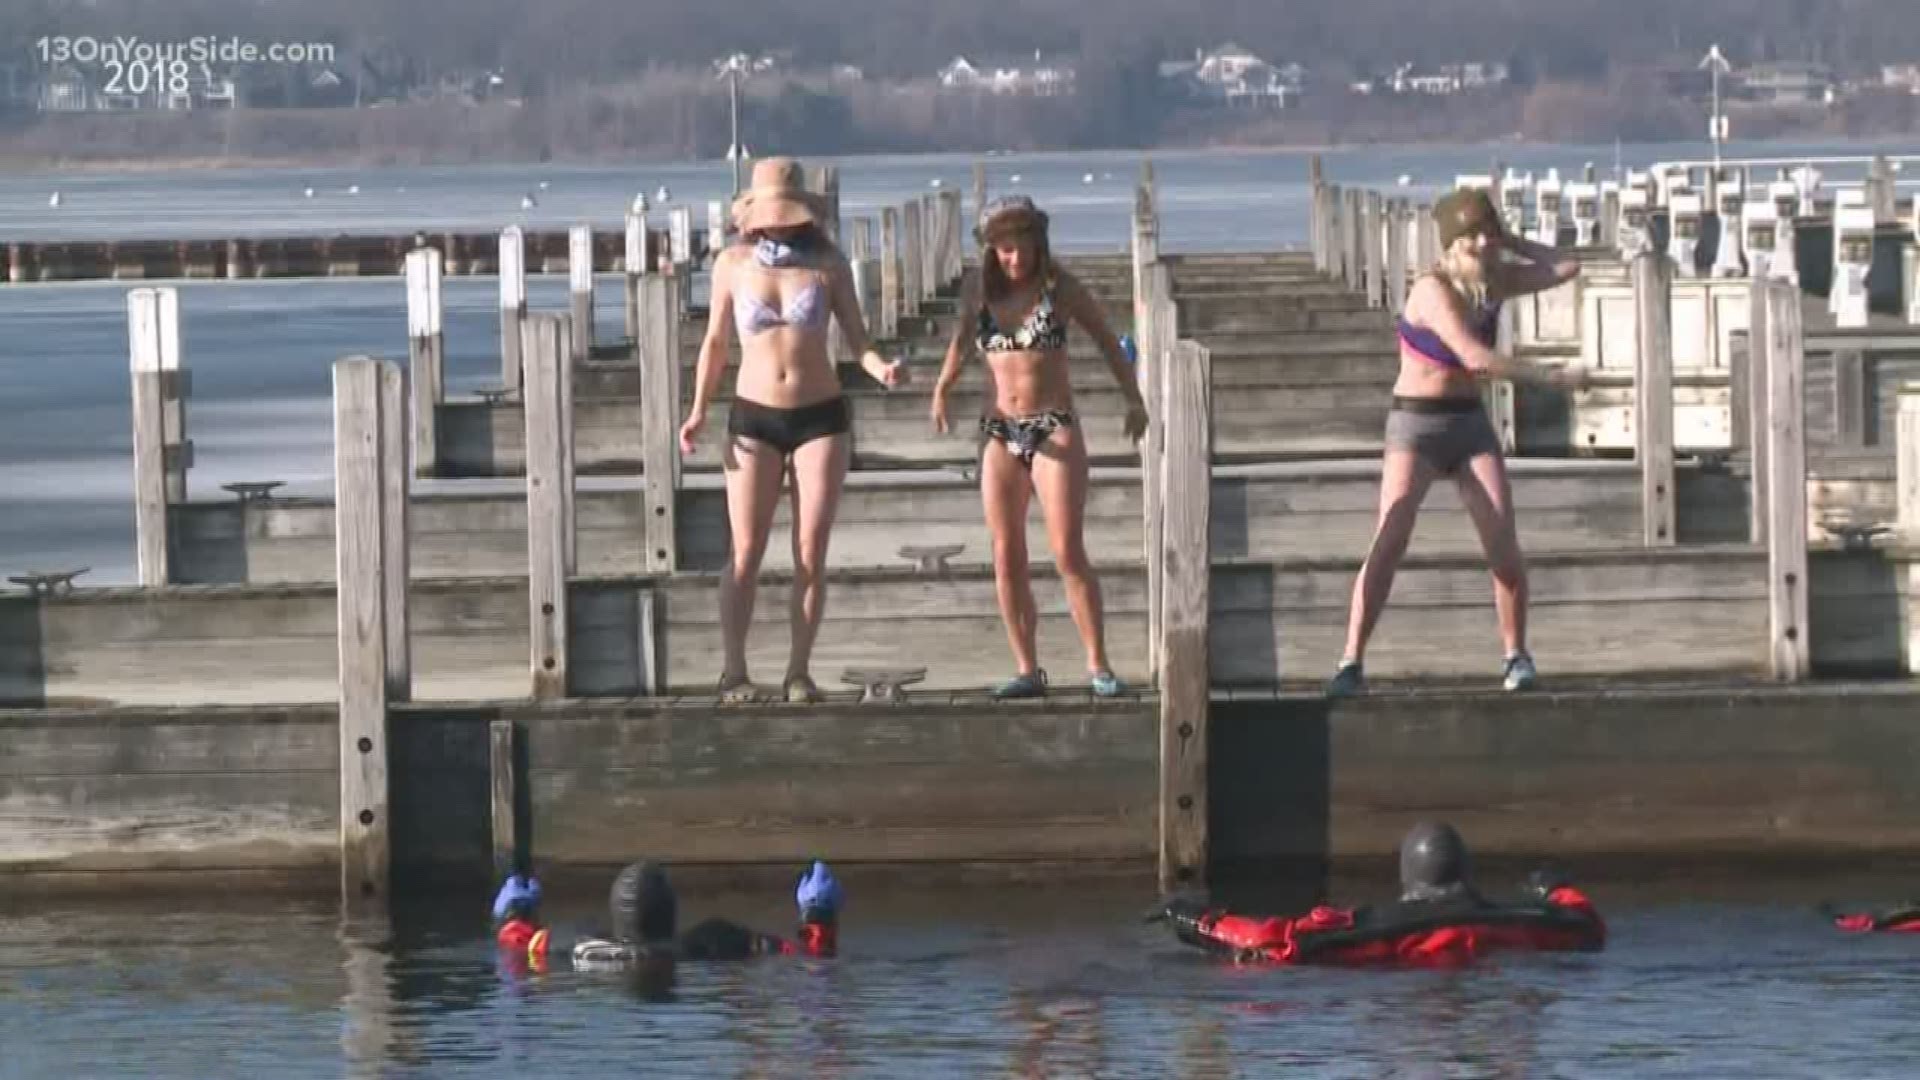 The Polar Plunge starts next weekend in Muskegon. The money raised goes to Special Olympics Michigan.